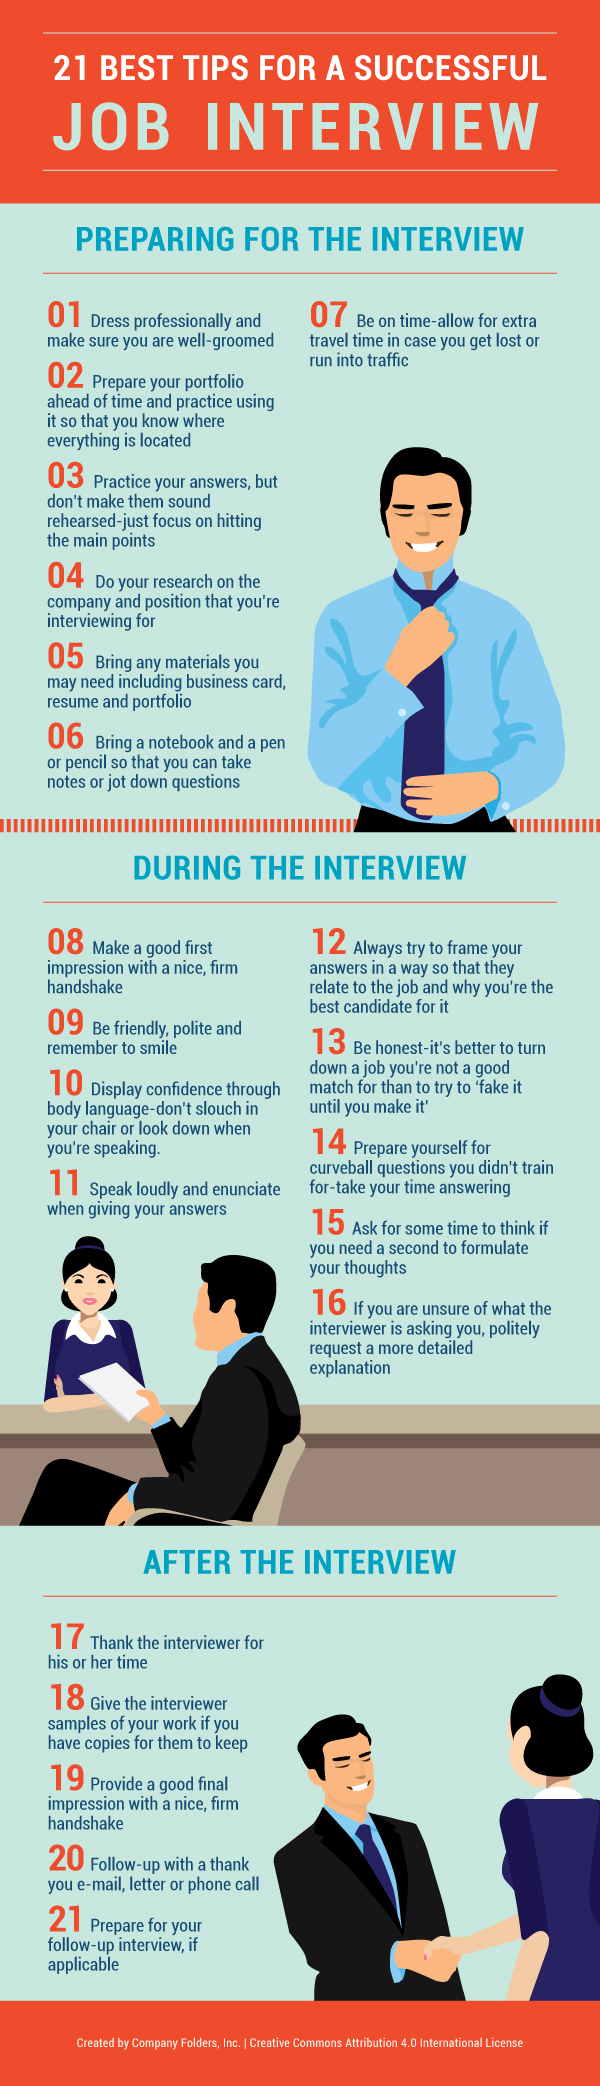 22 Graphic Design Job Interview Tips Questions Answers